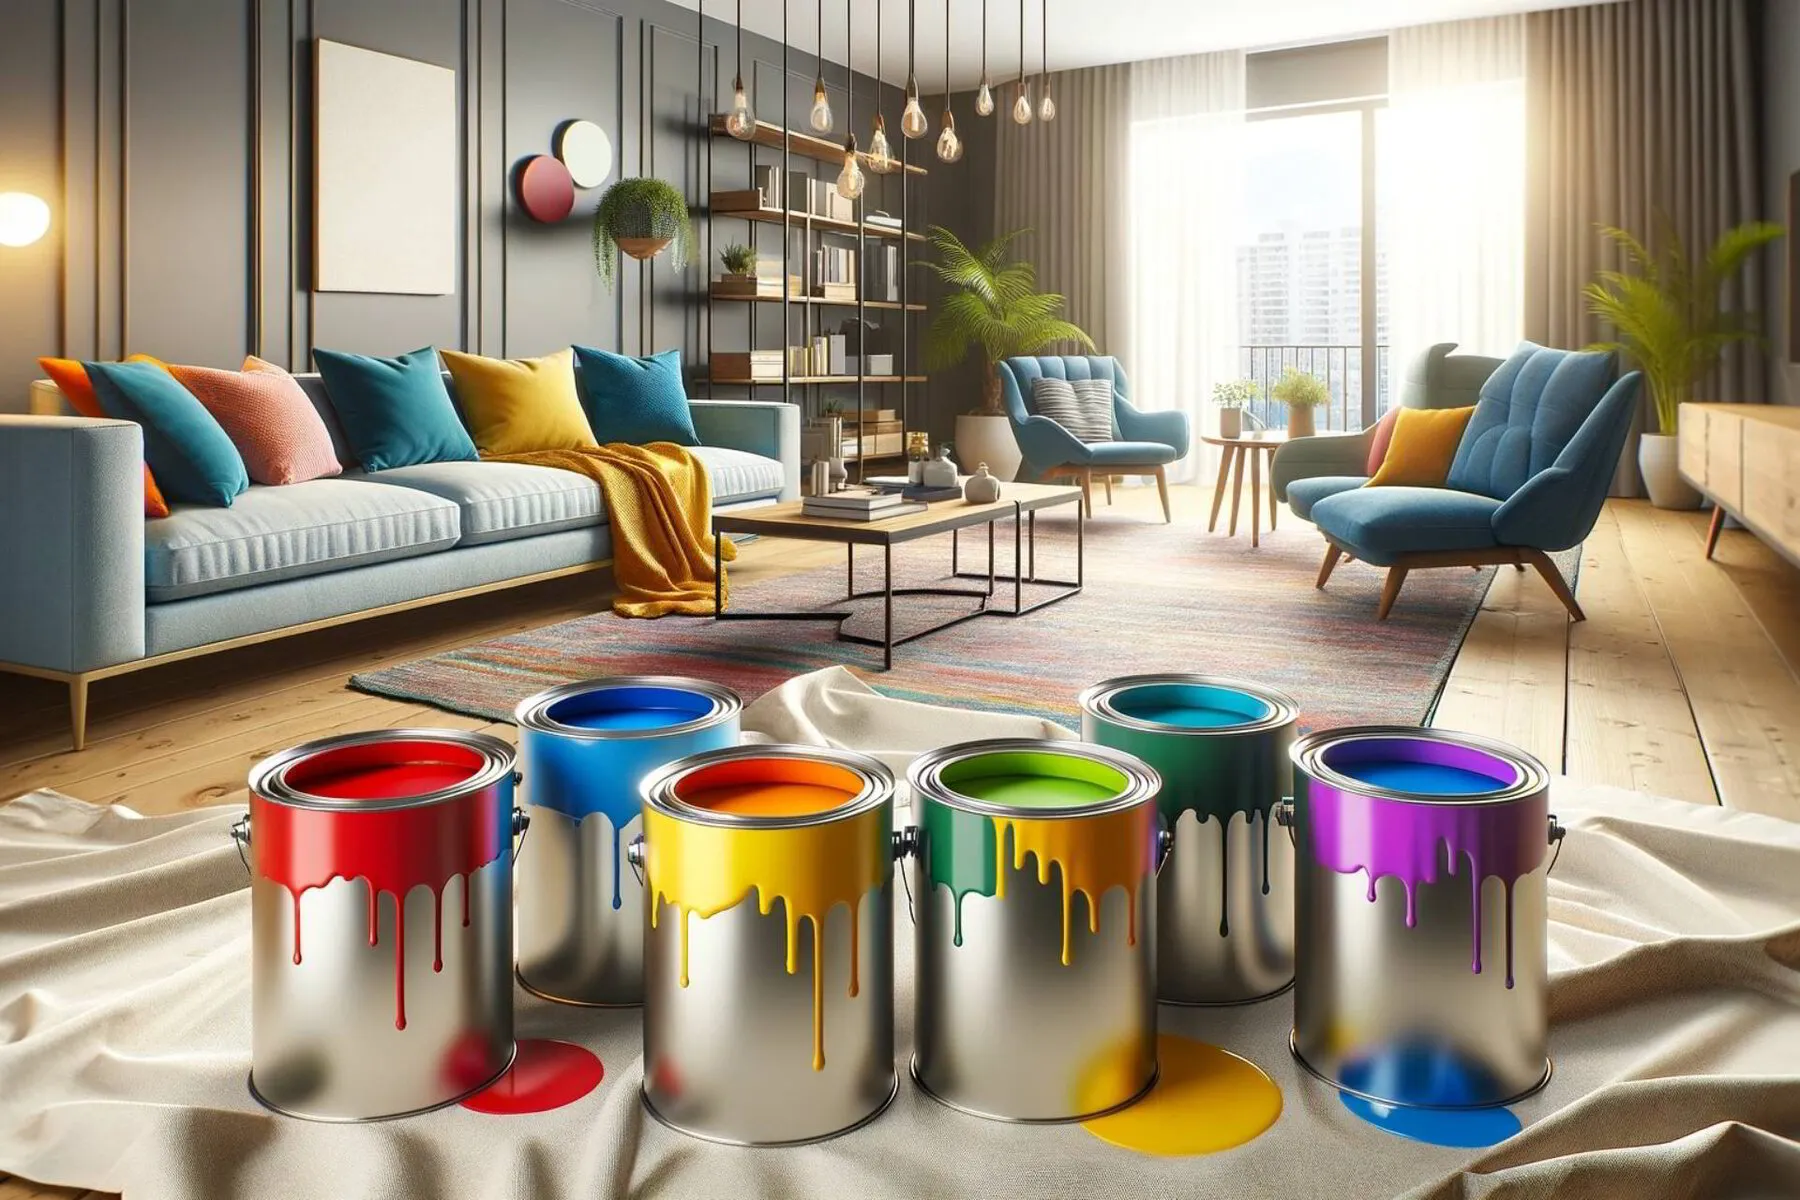 Six different brightly colored paint pots placed on a drop cloth in a living room setting